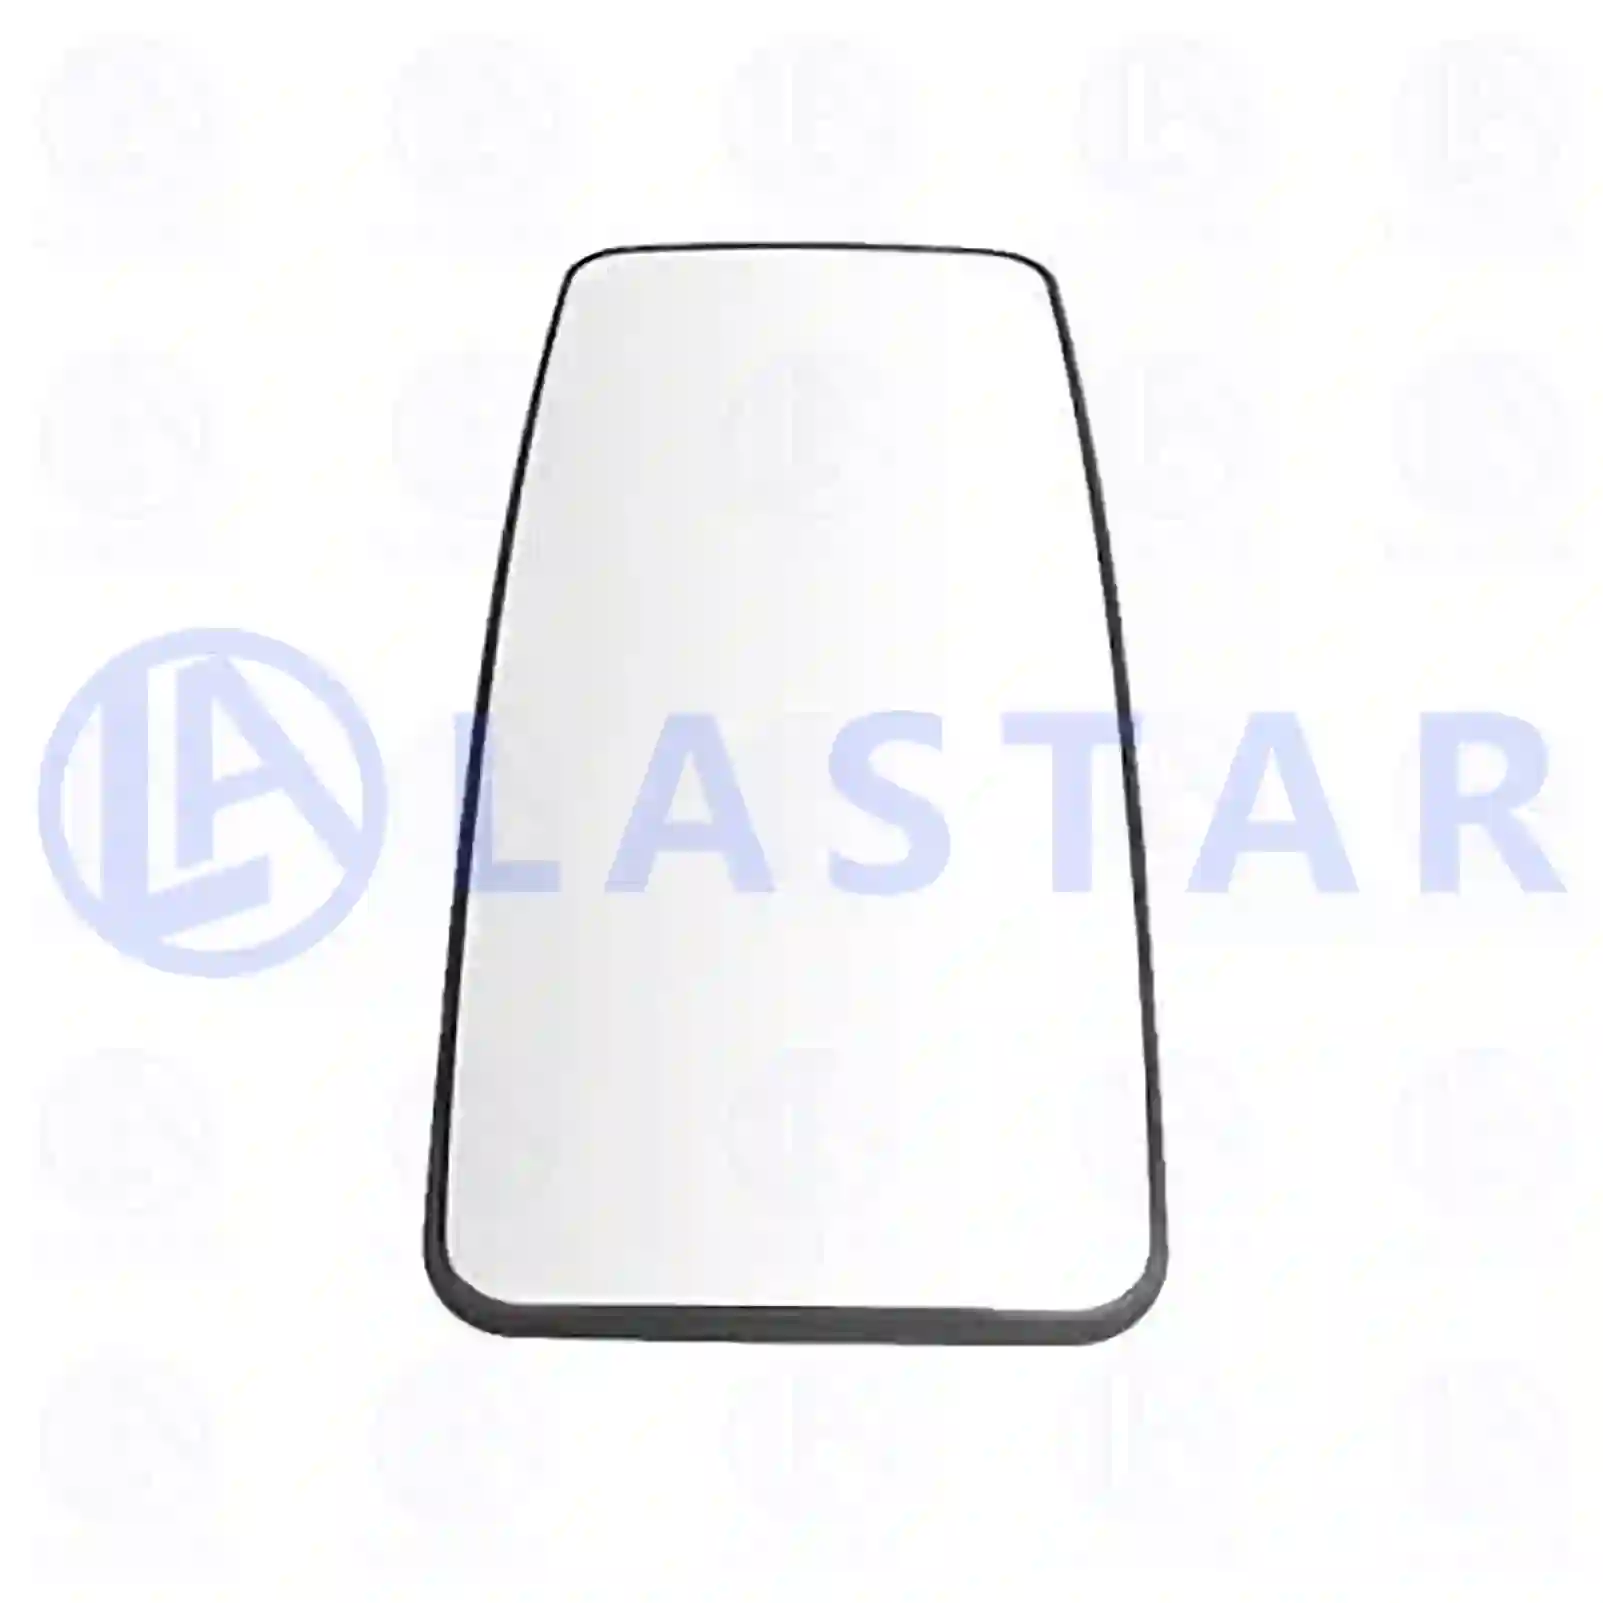 Mirror glass, main mirror, heated, 77718886, 0018112033, ZG60994-0008 ||  77718886 Lastar Spare Part | Truck Spare Parts, Auotomotive Spare Parts Mirror glass, main mirror, heated, 77718886, 0018112033, ZG60994-0008 ||  77718886 Lastar Spare Part | Truck Spare Parts, Auotomotive Spare Parts